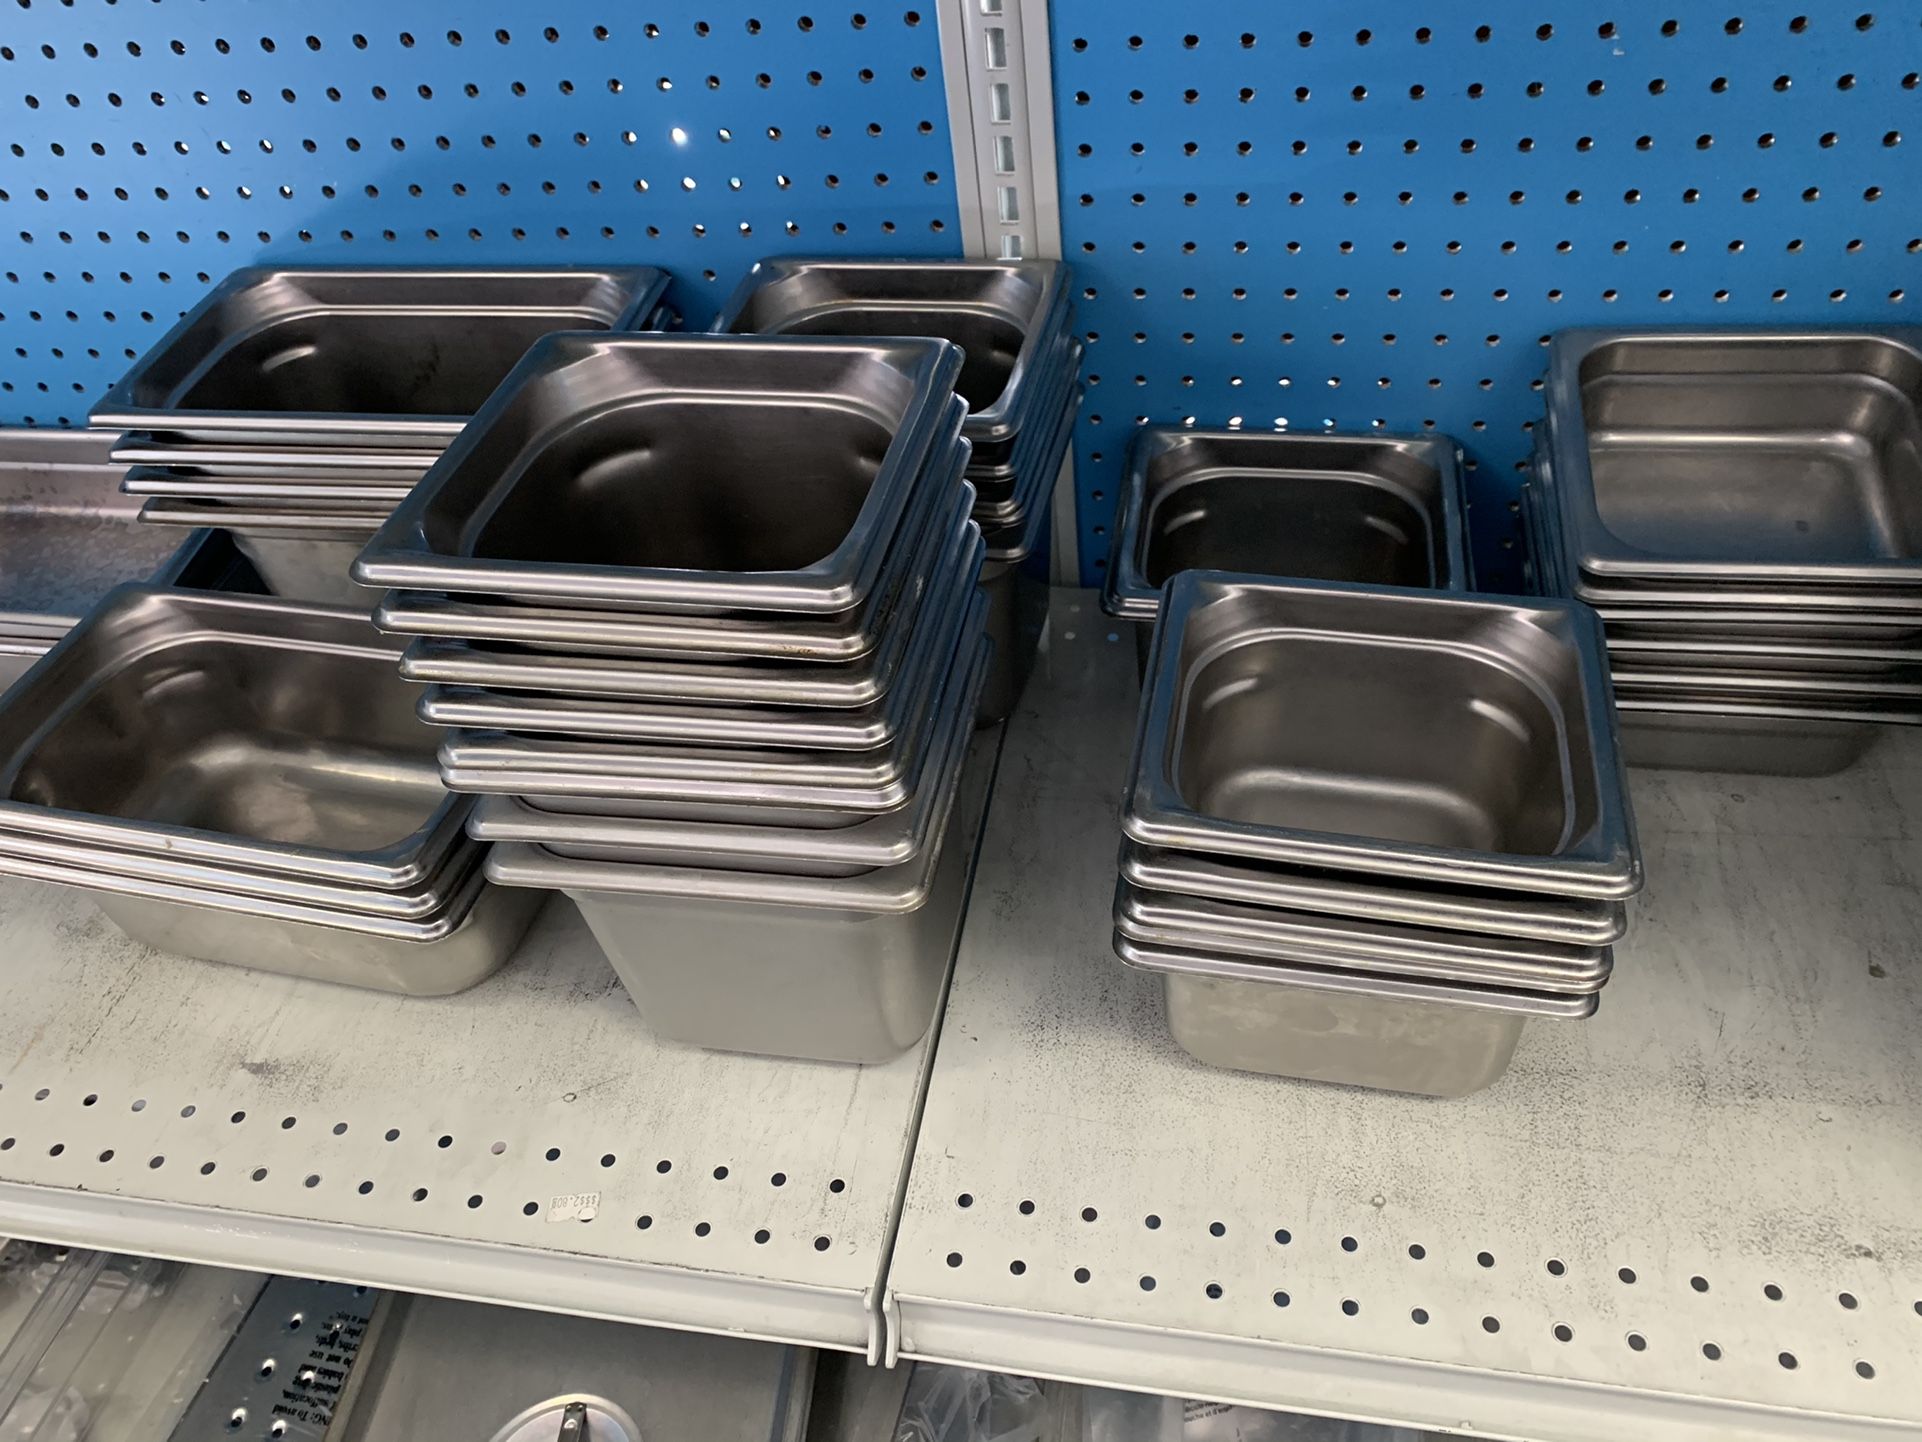 Commercial Restaurant stainless steel steam table pans used